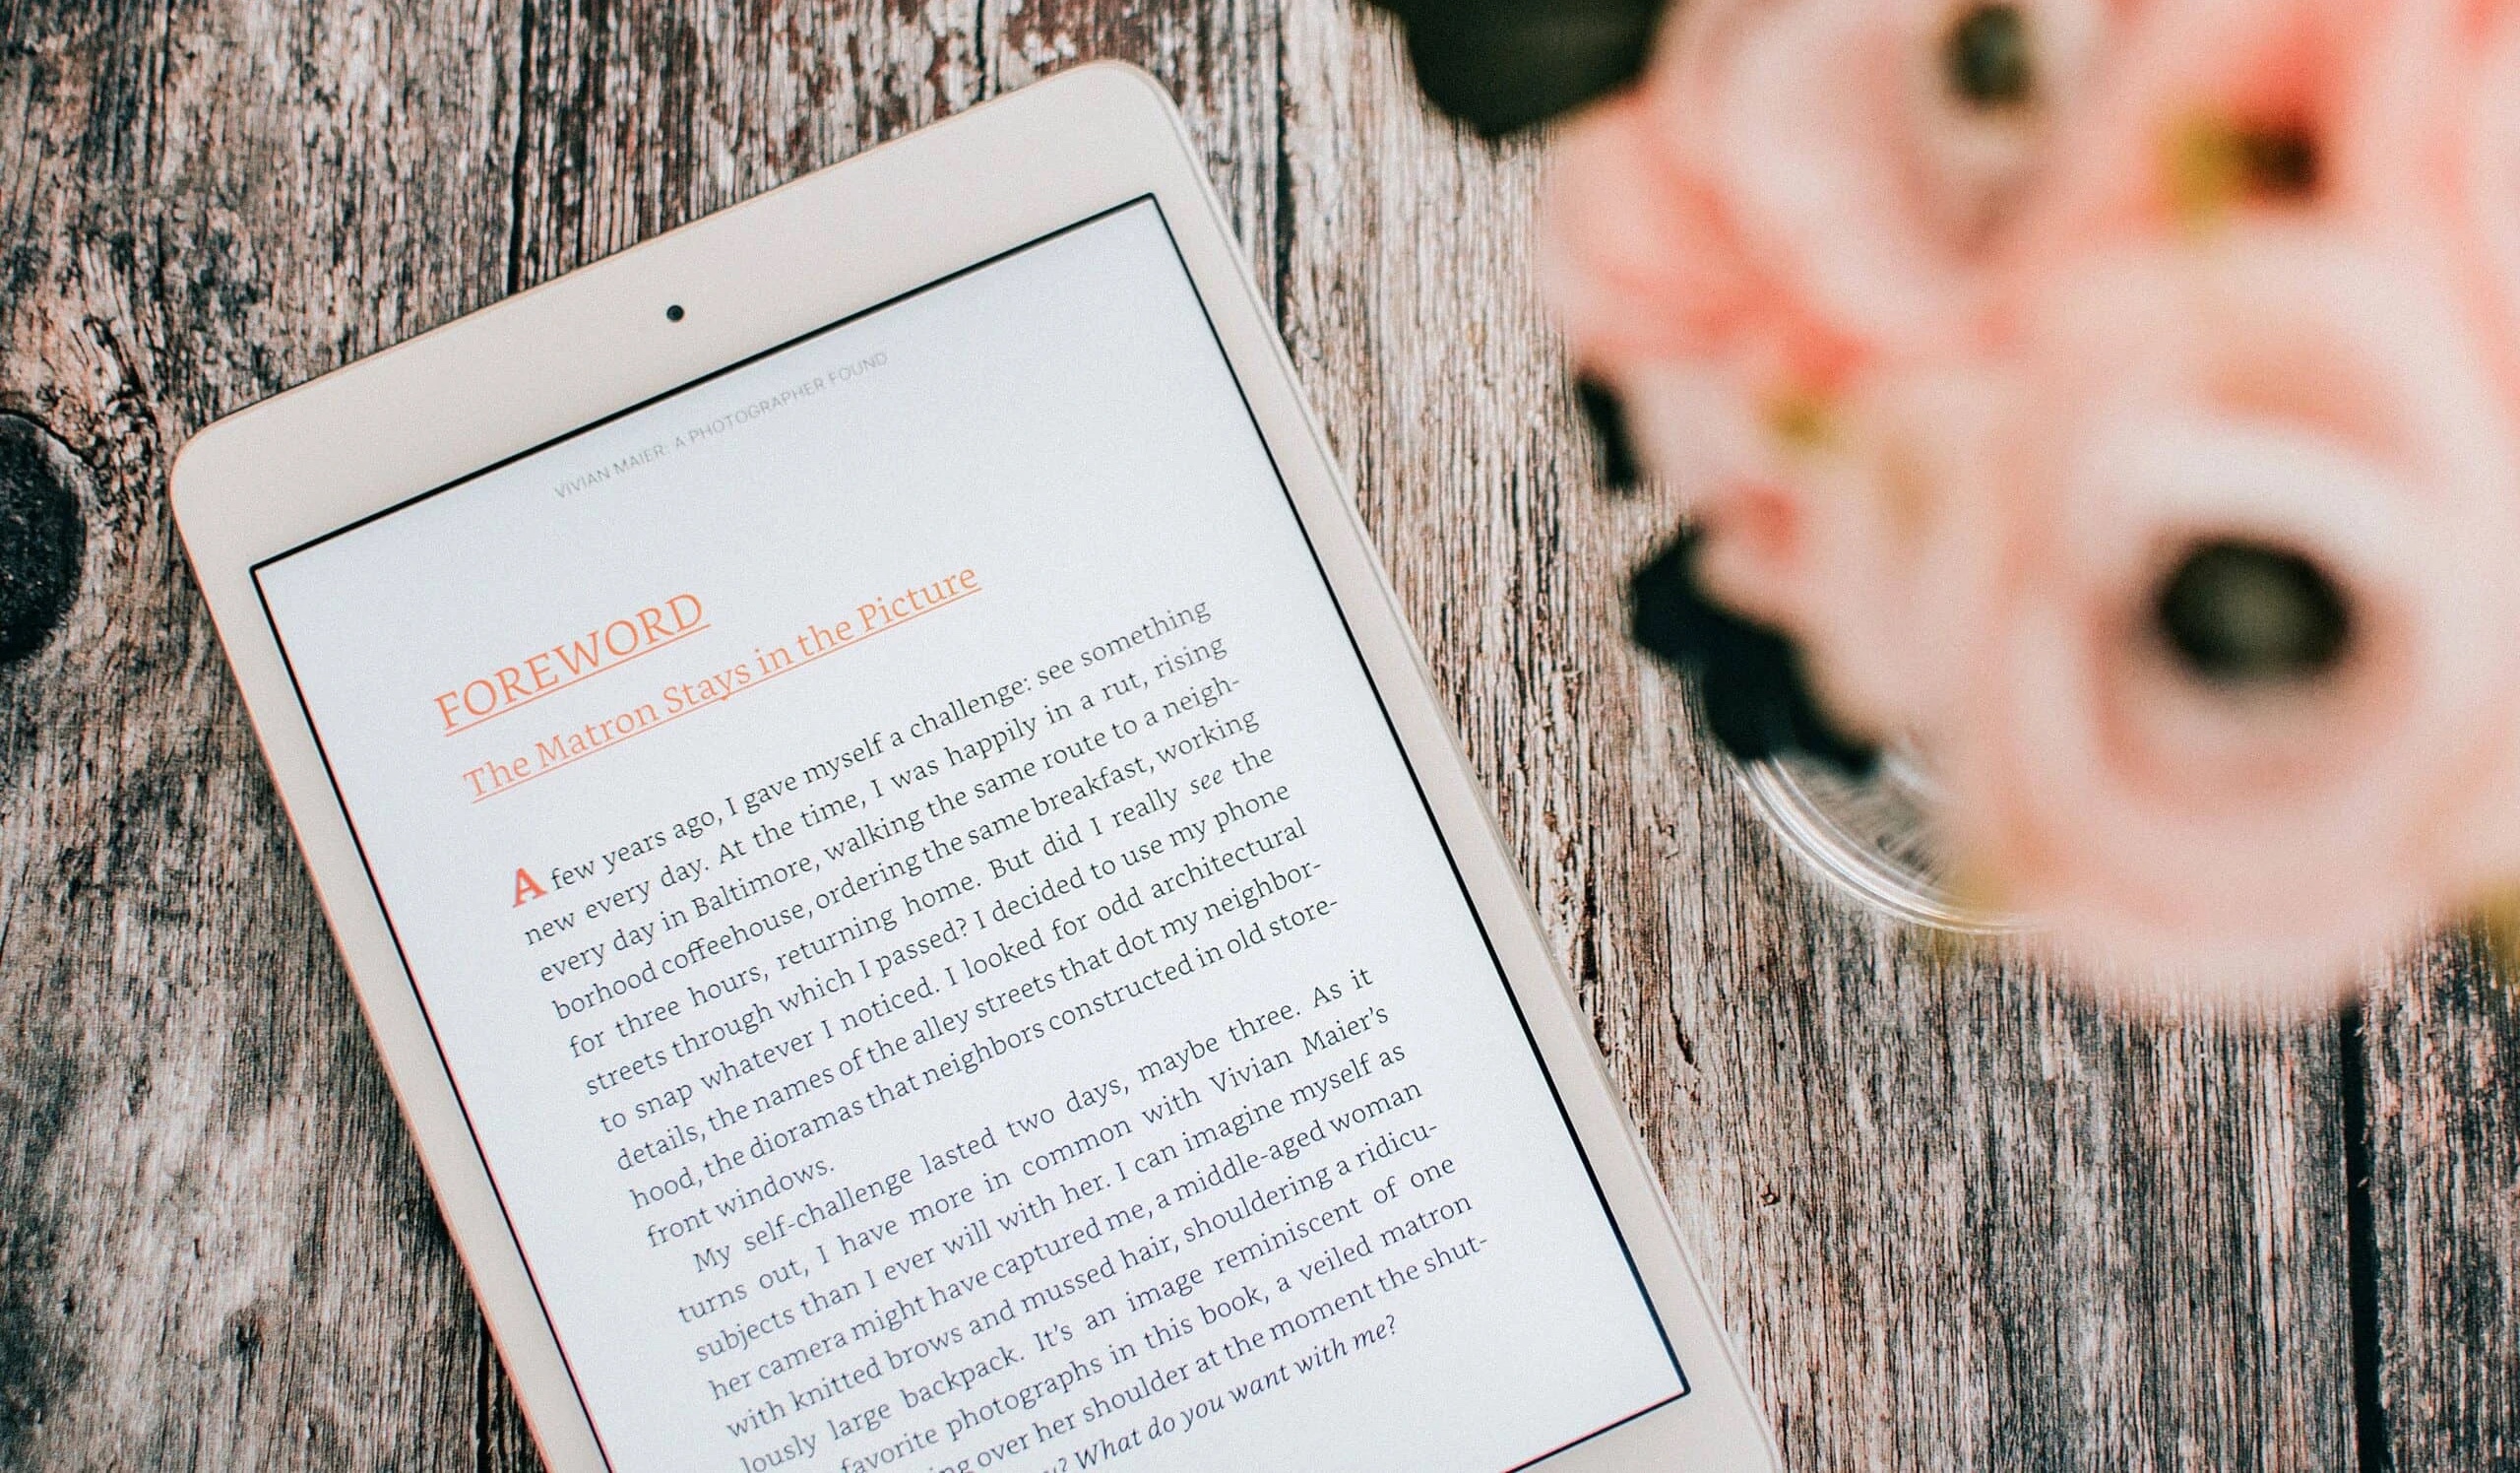 Kindle Free Trial: Get 1 Month of Kindle Unlimited for Free or 2 Months for  $5